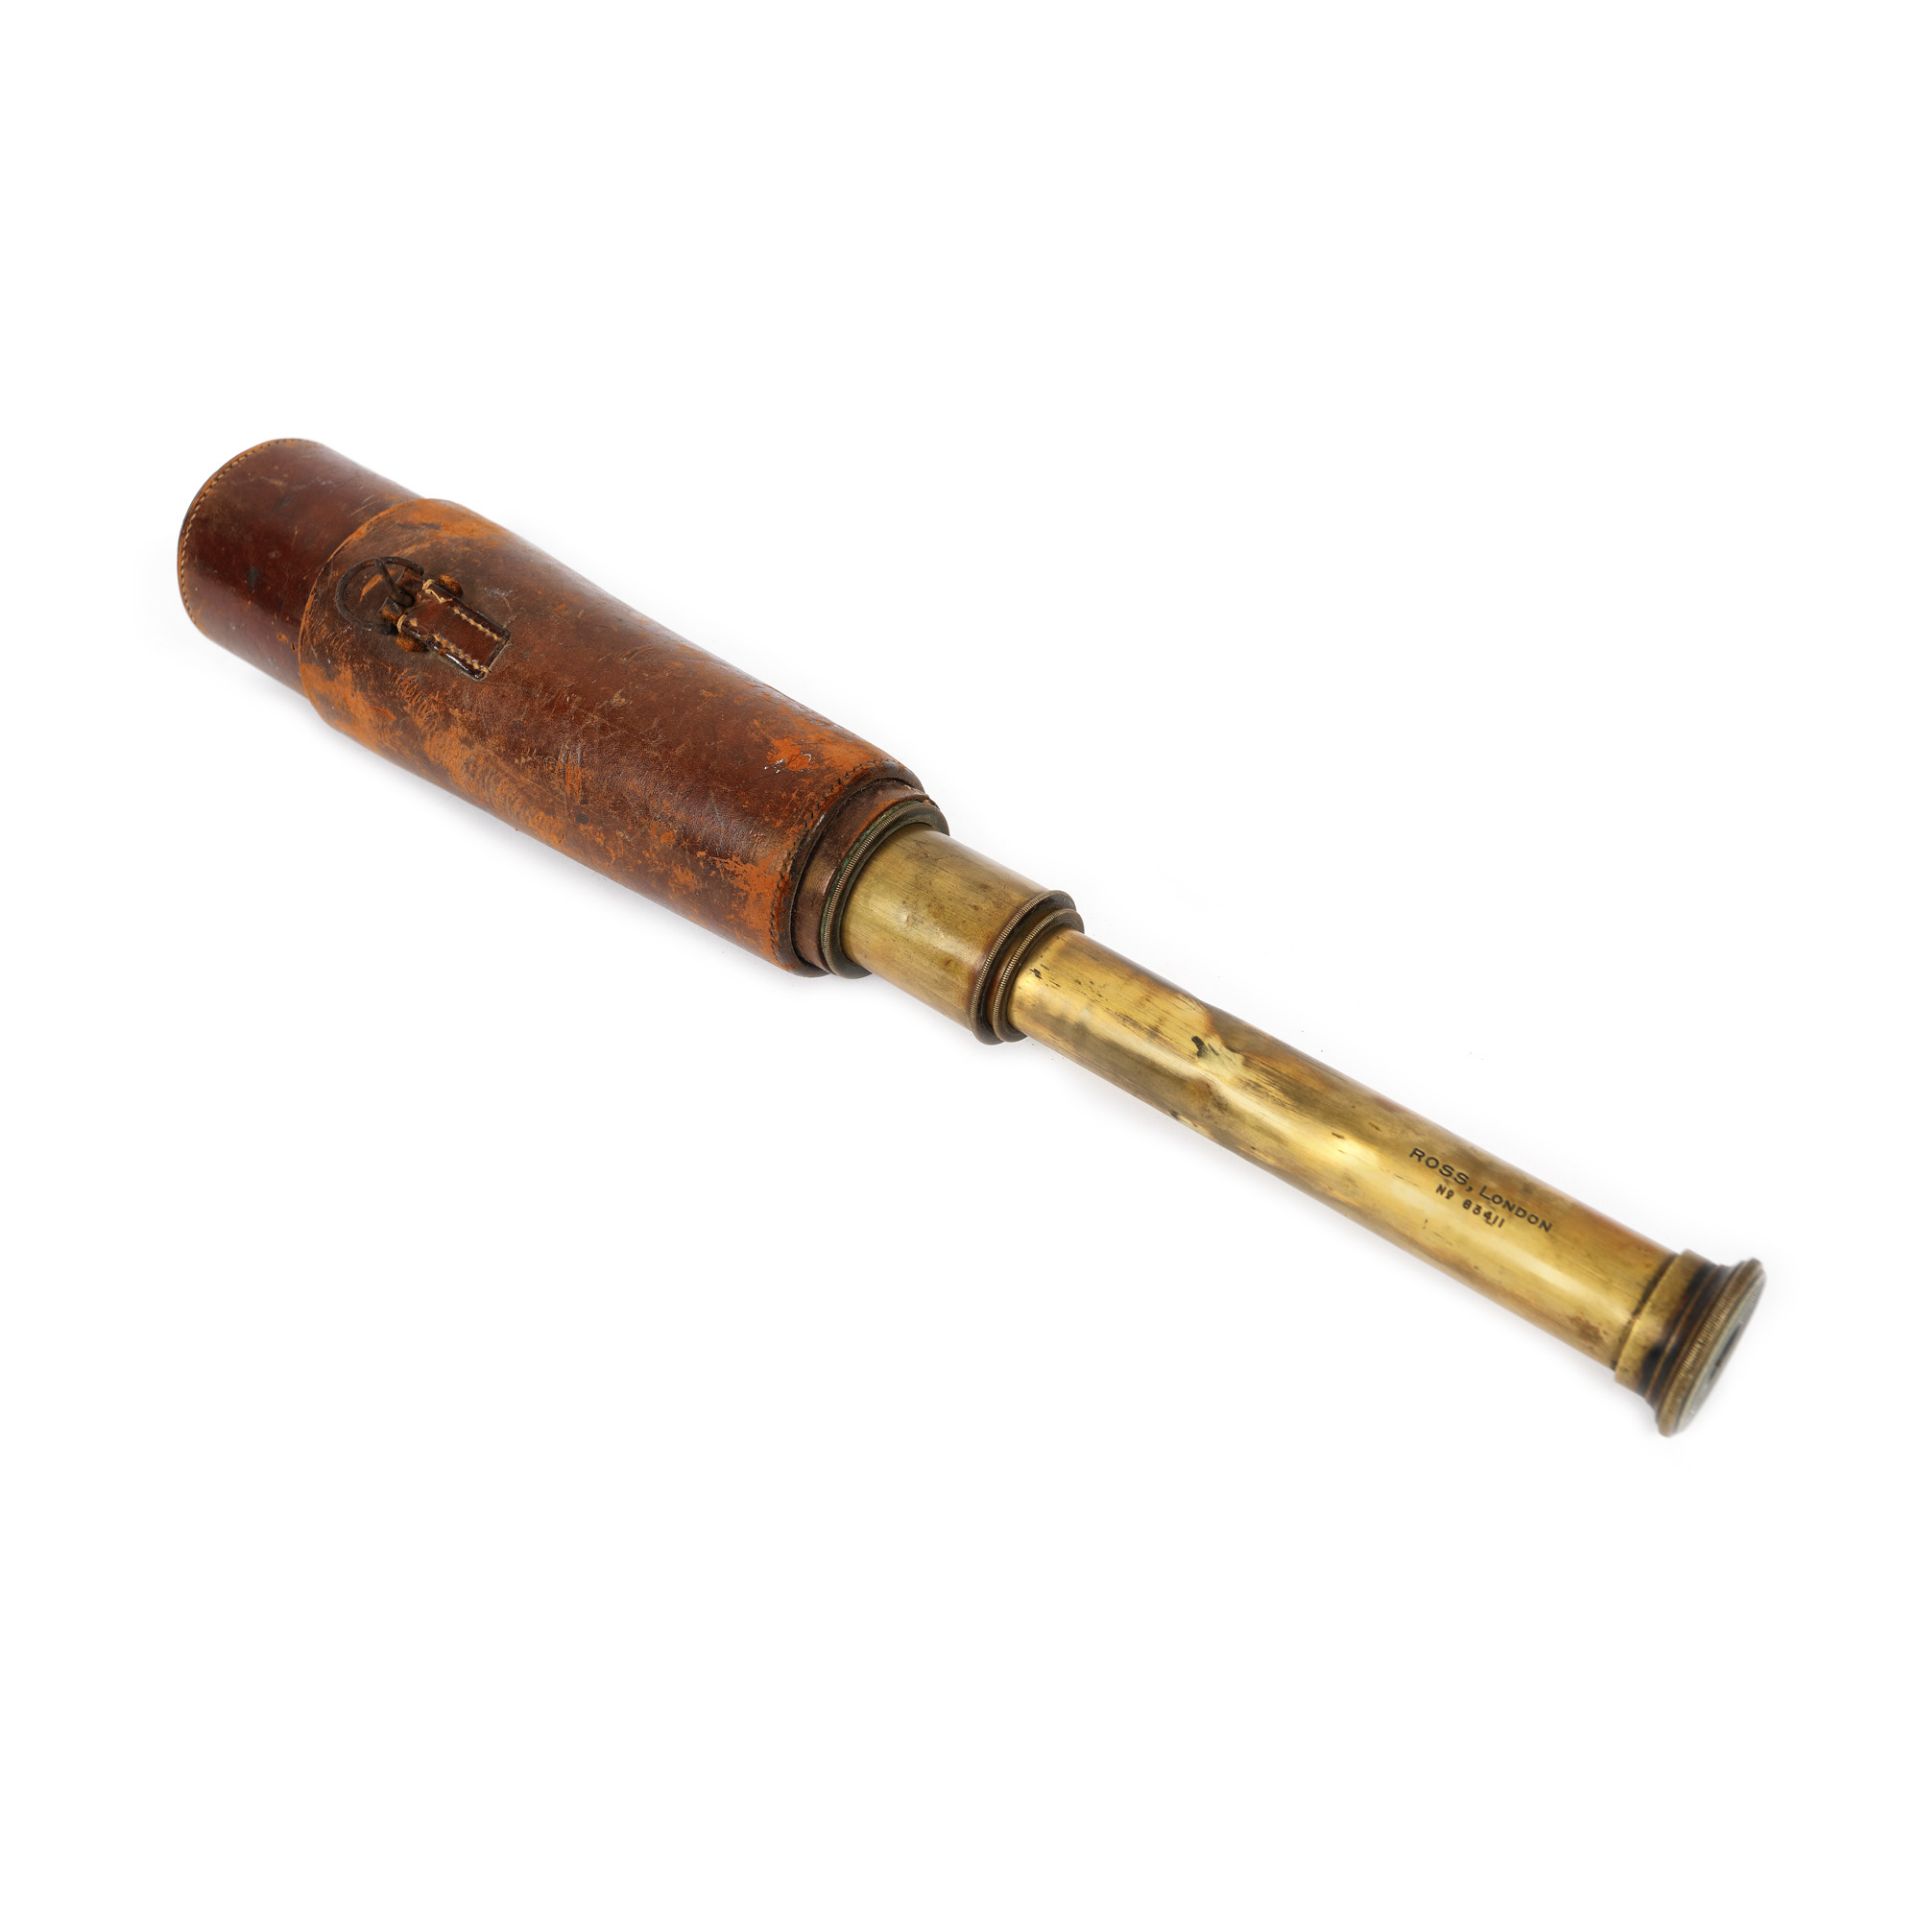 Maritime telescope with leather sheath, "Ross of London" brand, Great Britain, approx. 1880 - Image 2 of 3